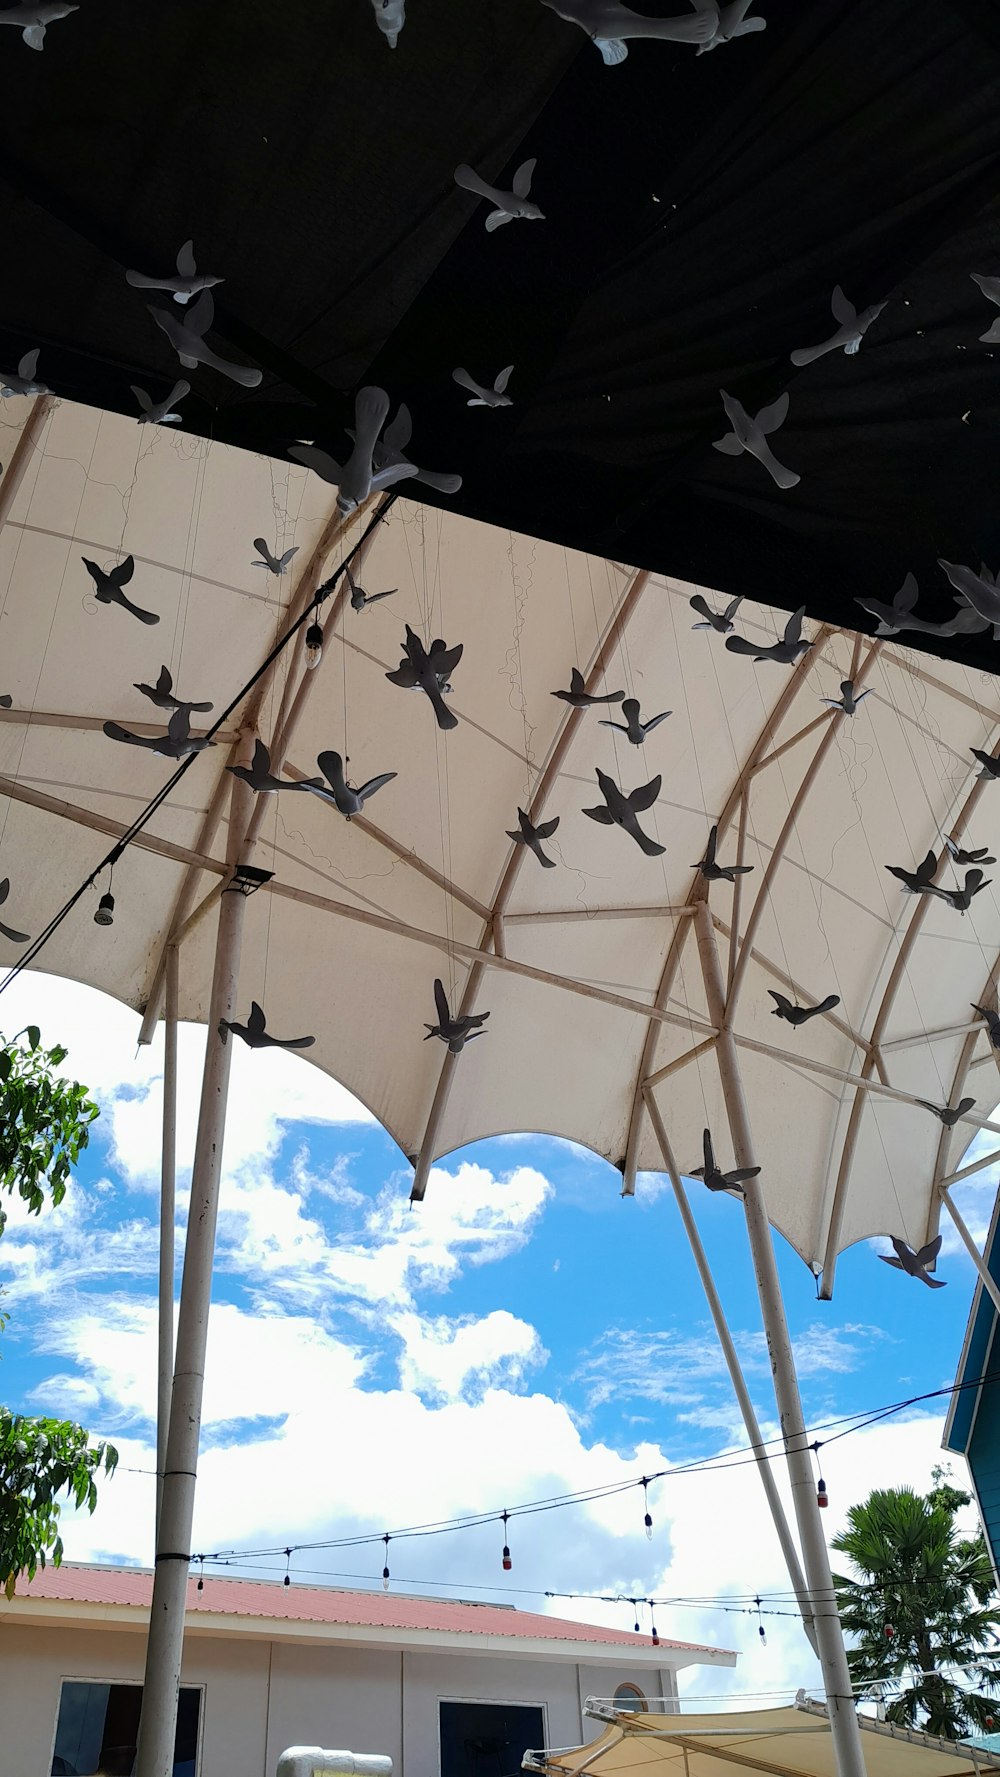 a group of umbrellas with birds on them